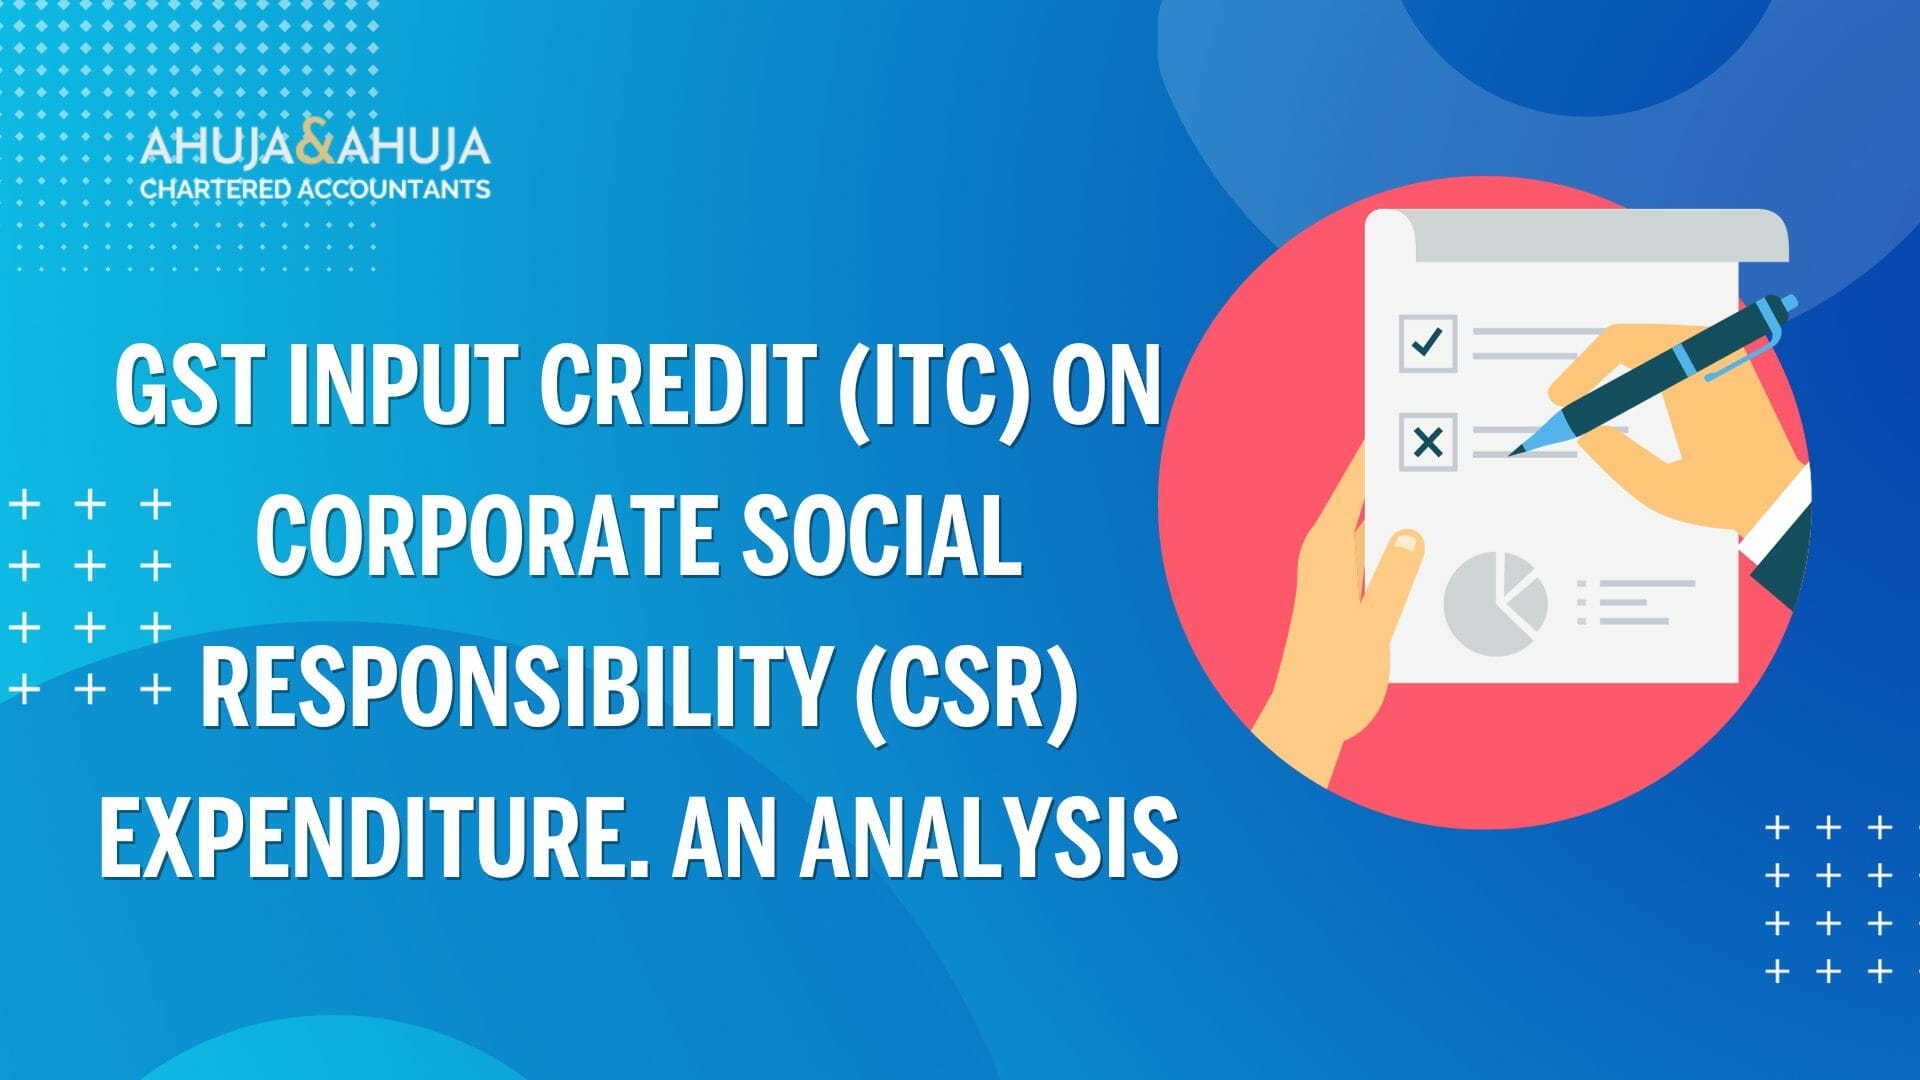 GST Input Credit (ITC) on Corporate Social Responsibility (CSR) Expenditure. An Analysis